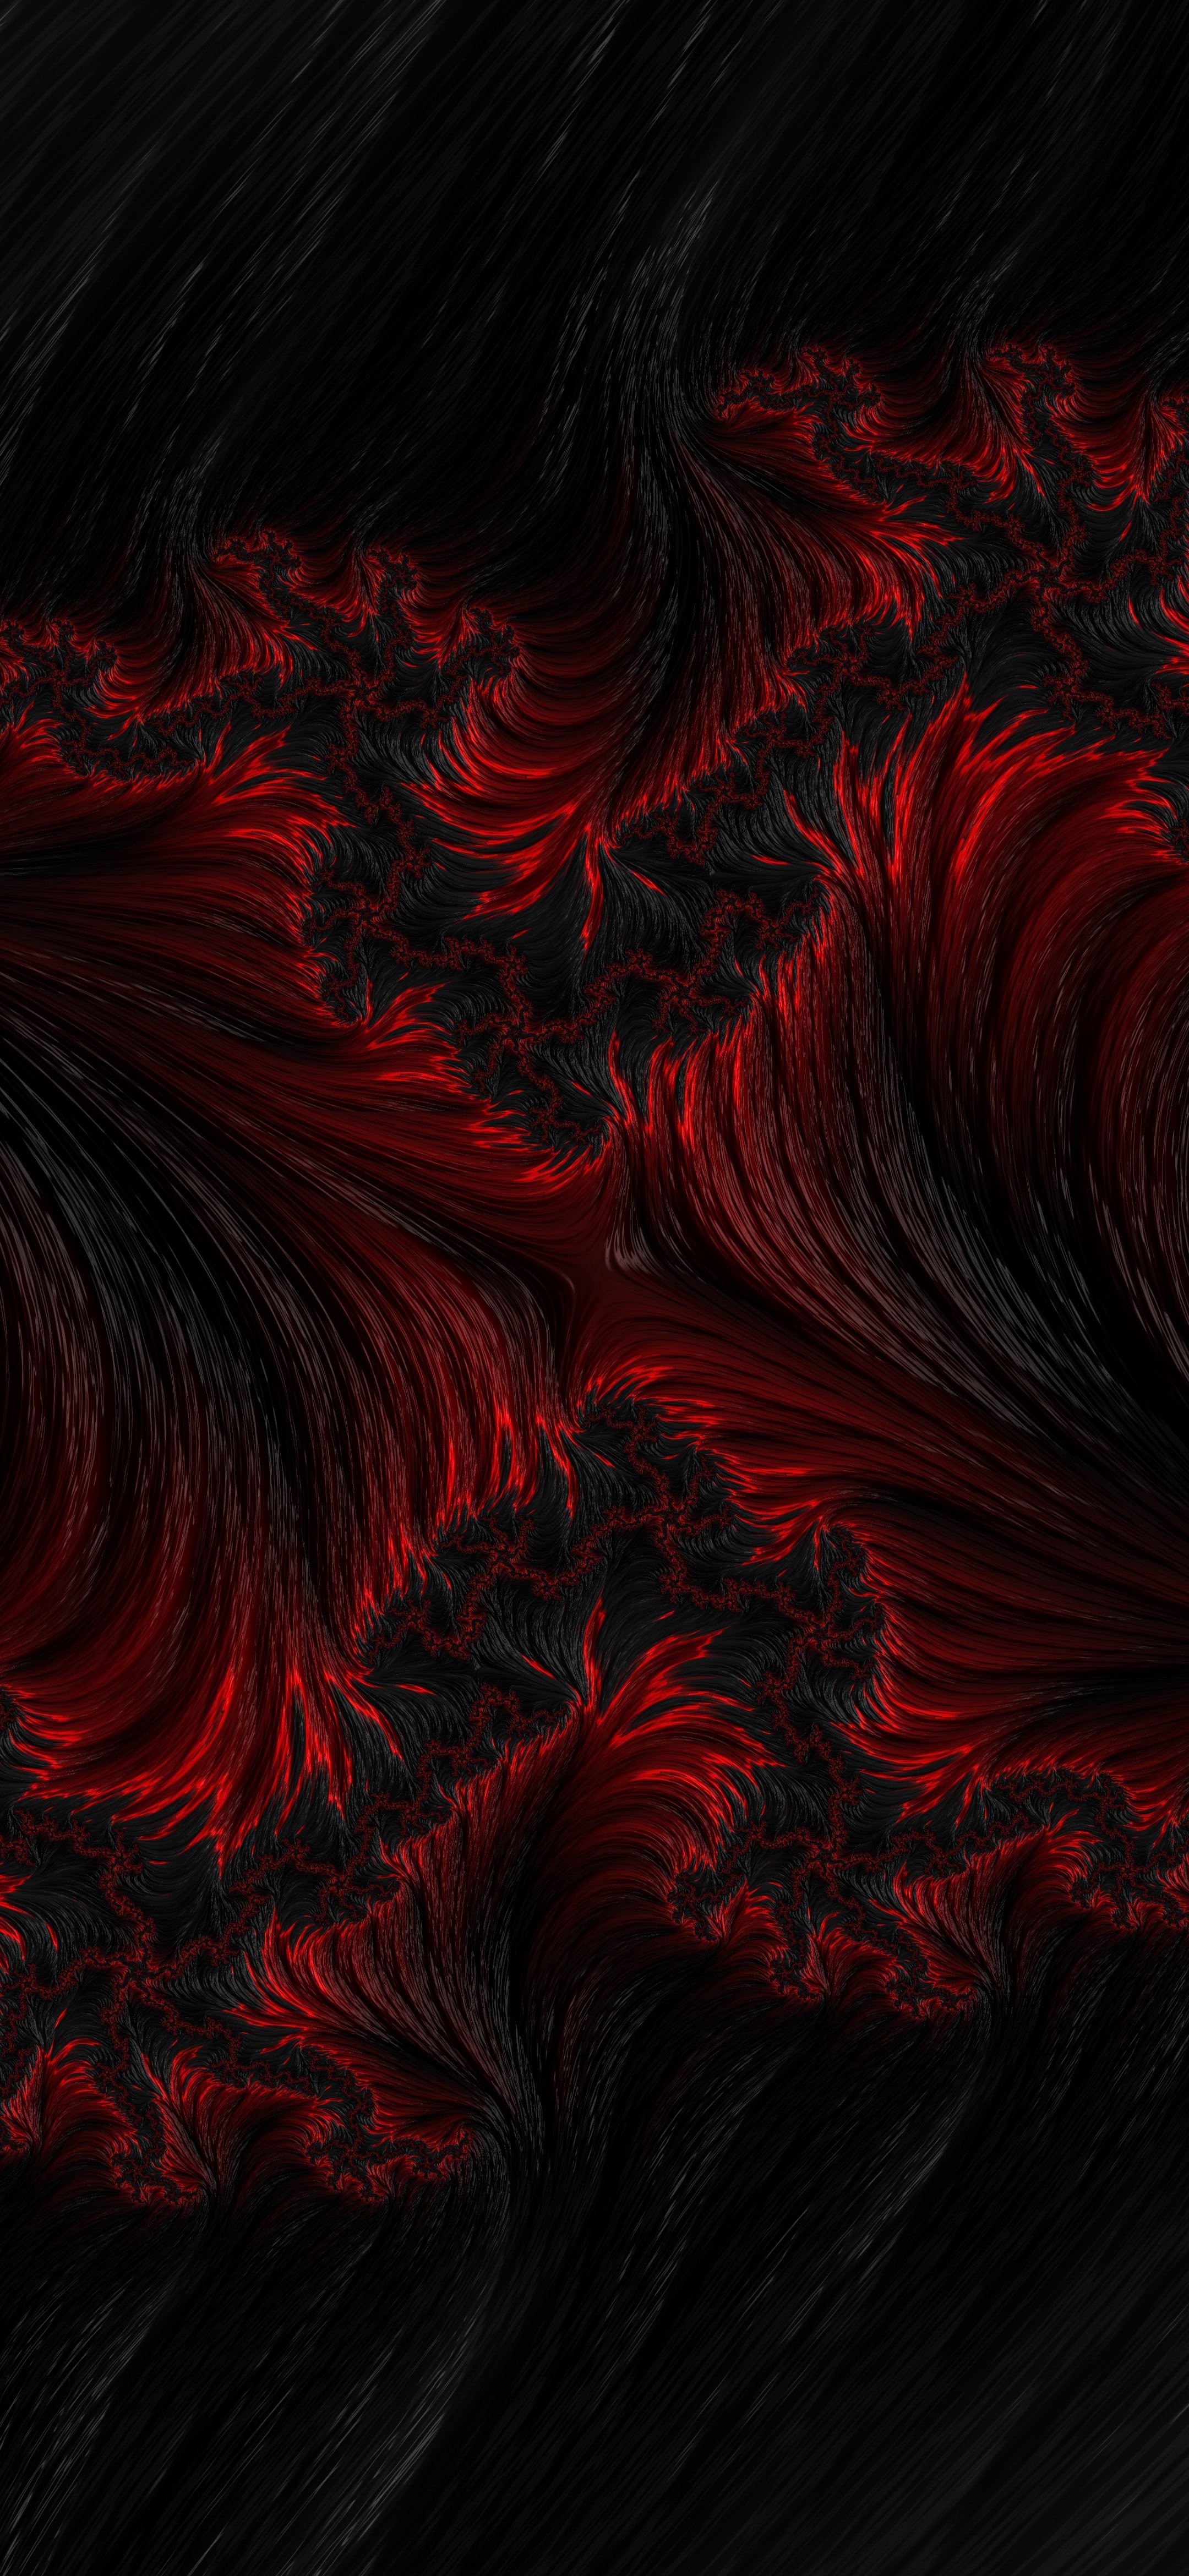 wavy, black, abstract, red, fractal 2160p